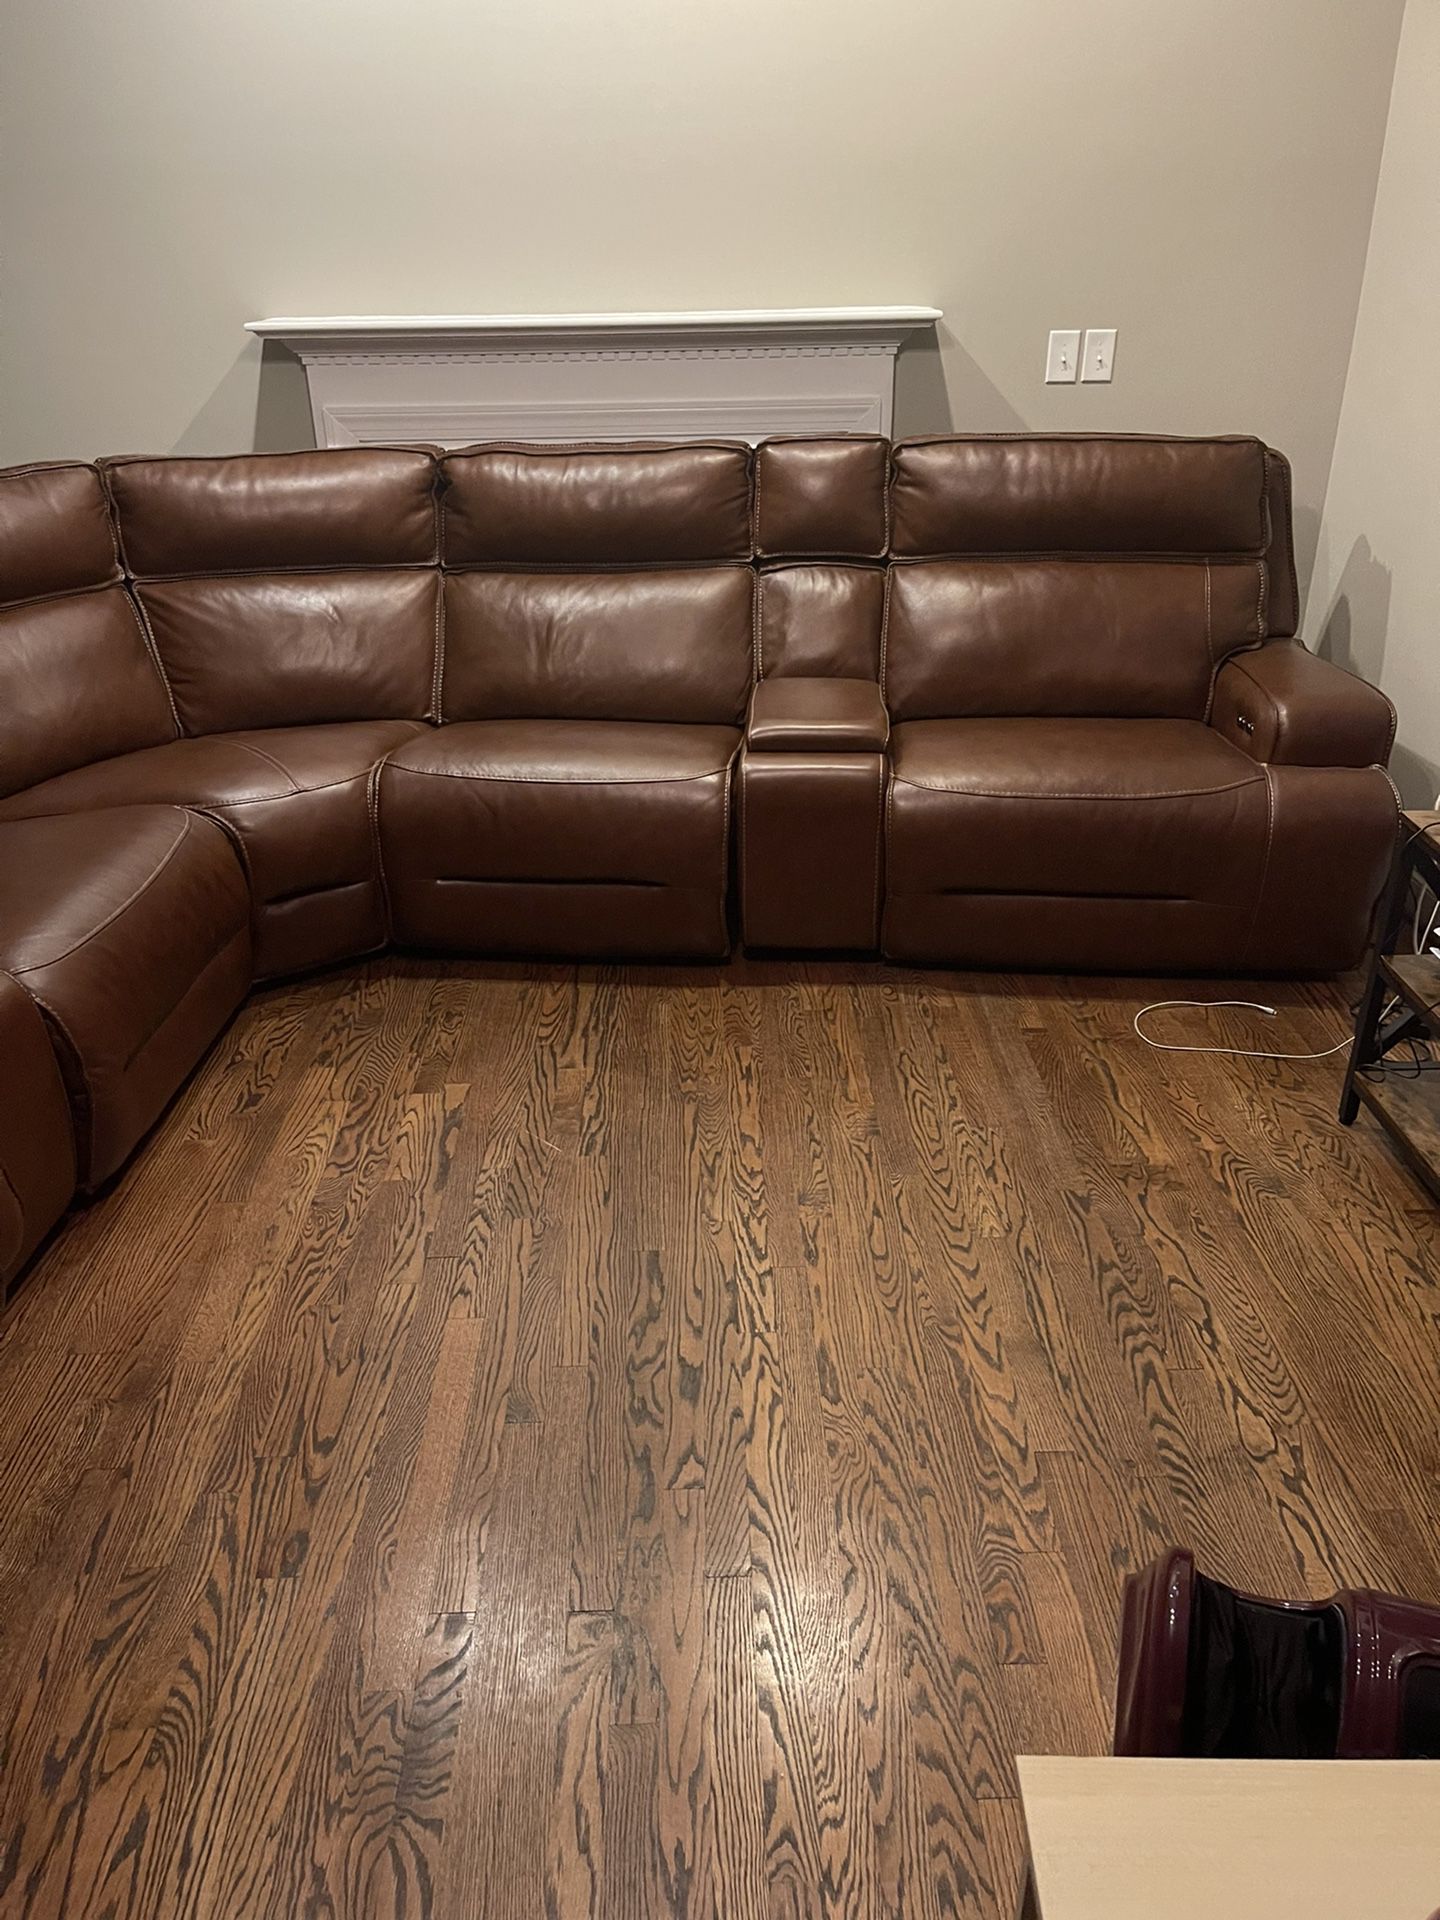 Large Leather Sectional - Like new conditon